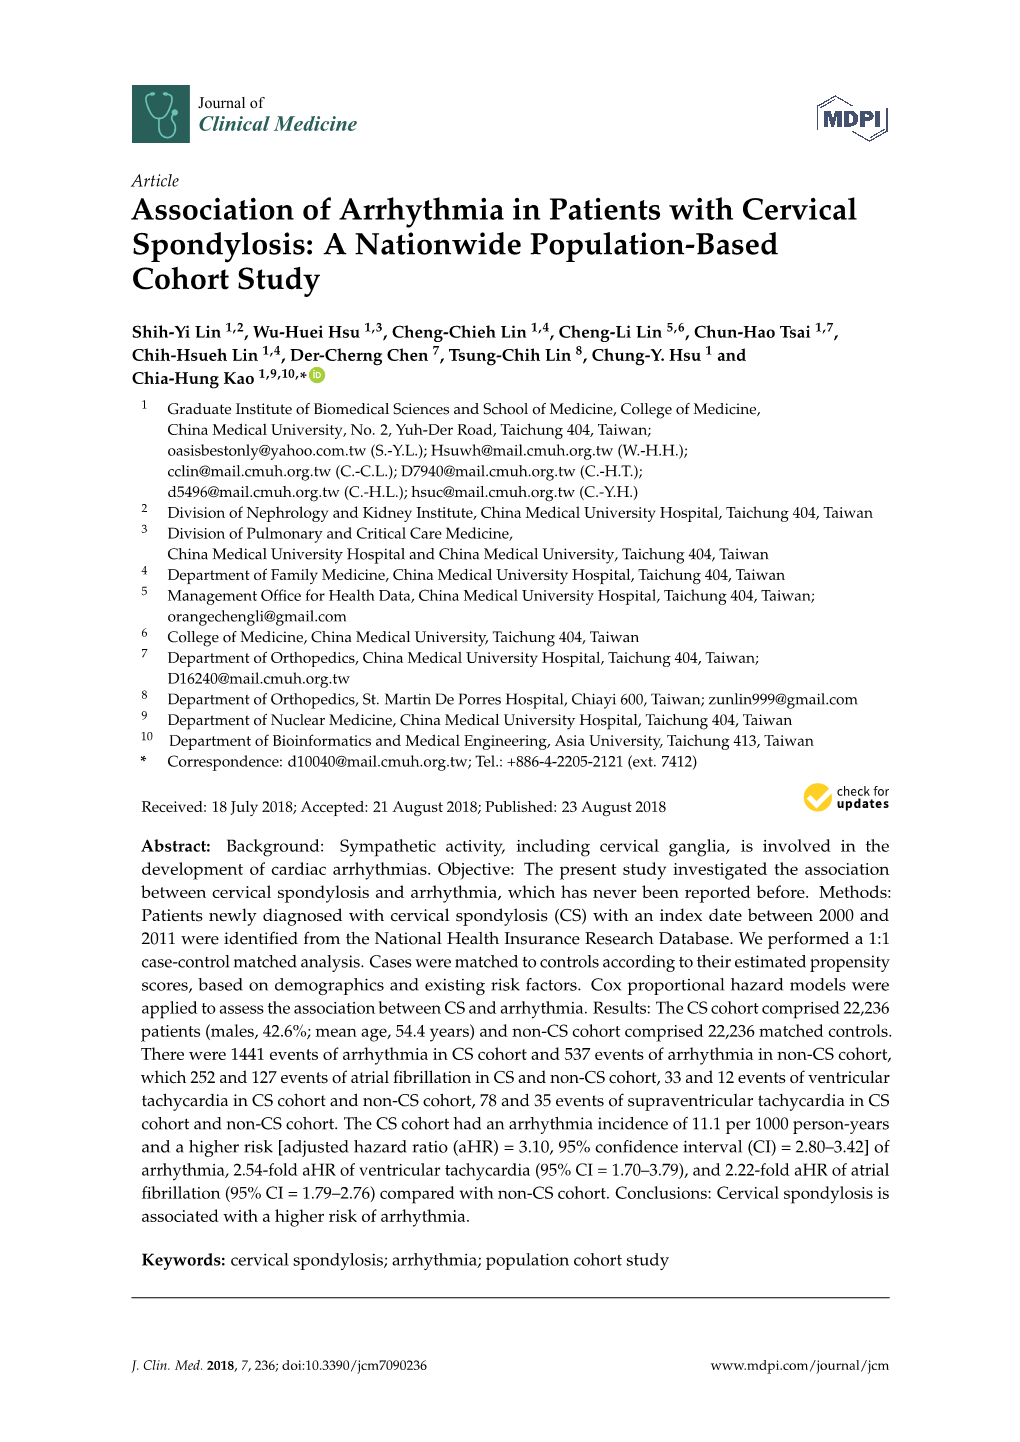 Association of Arrhythmia in Patients with Cervical Spondylosis: a Nationwide Population-Based Cohort Study